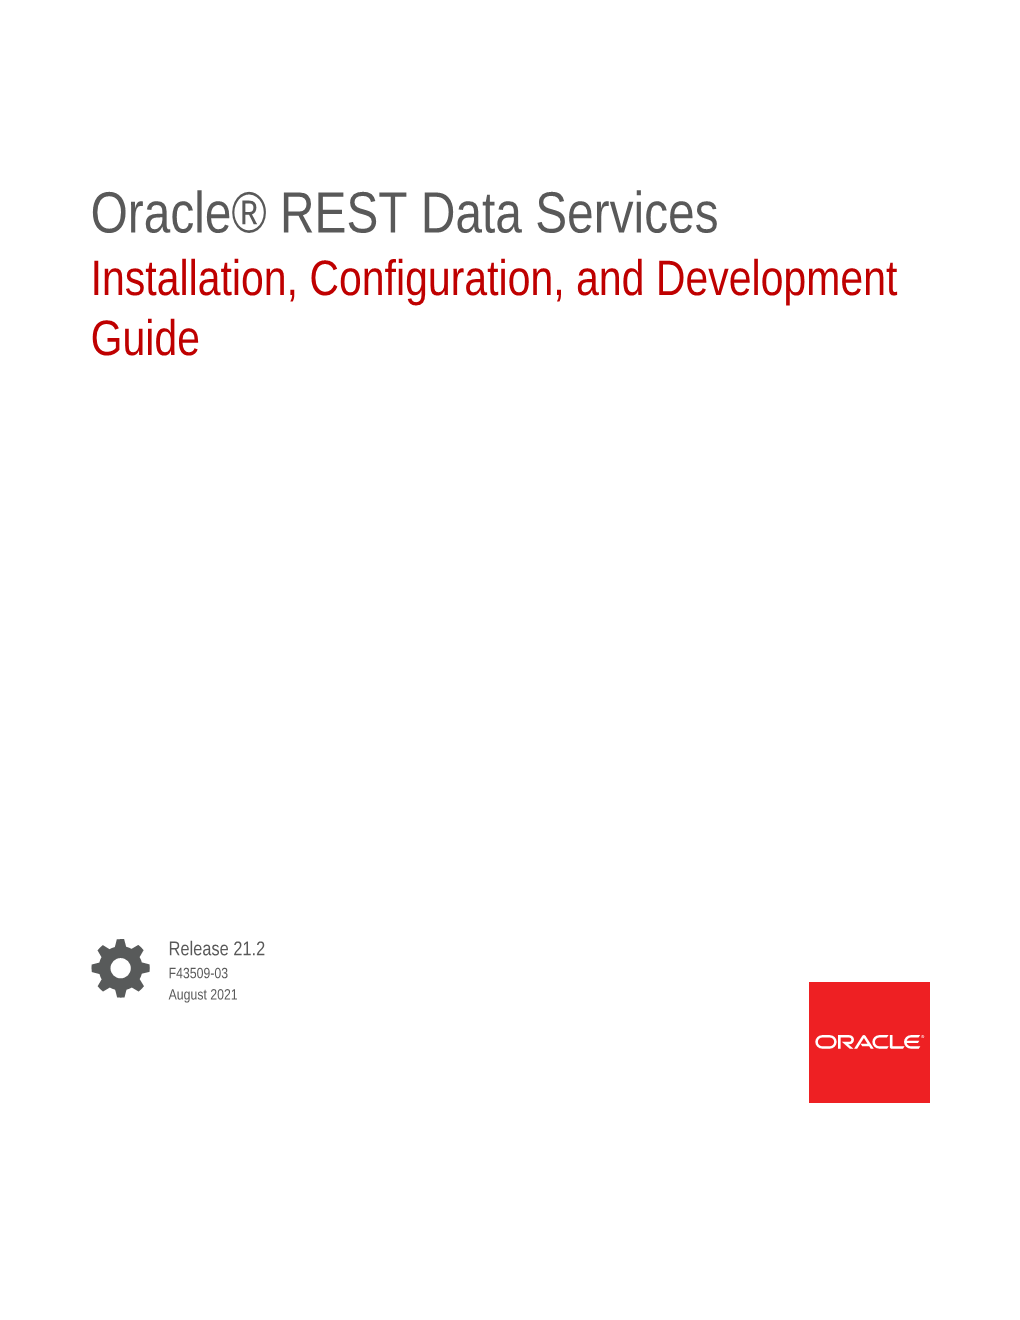 Oracle® REST Data Services Installation, Configuration, and Development Guide